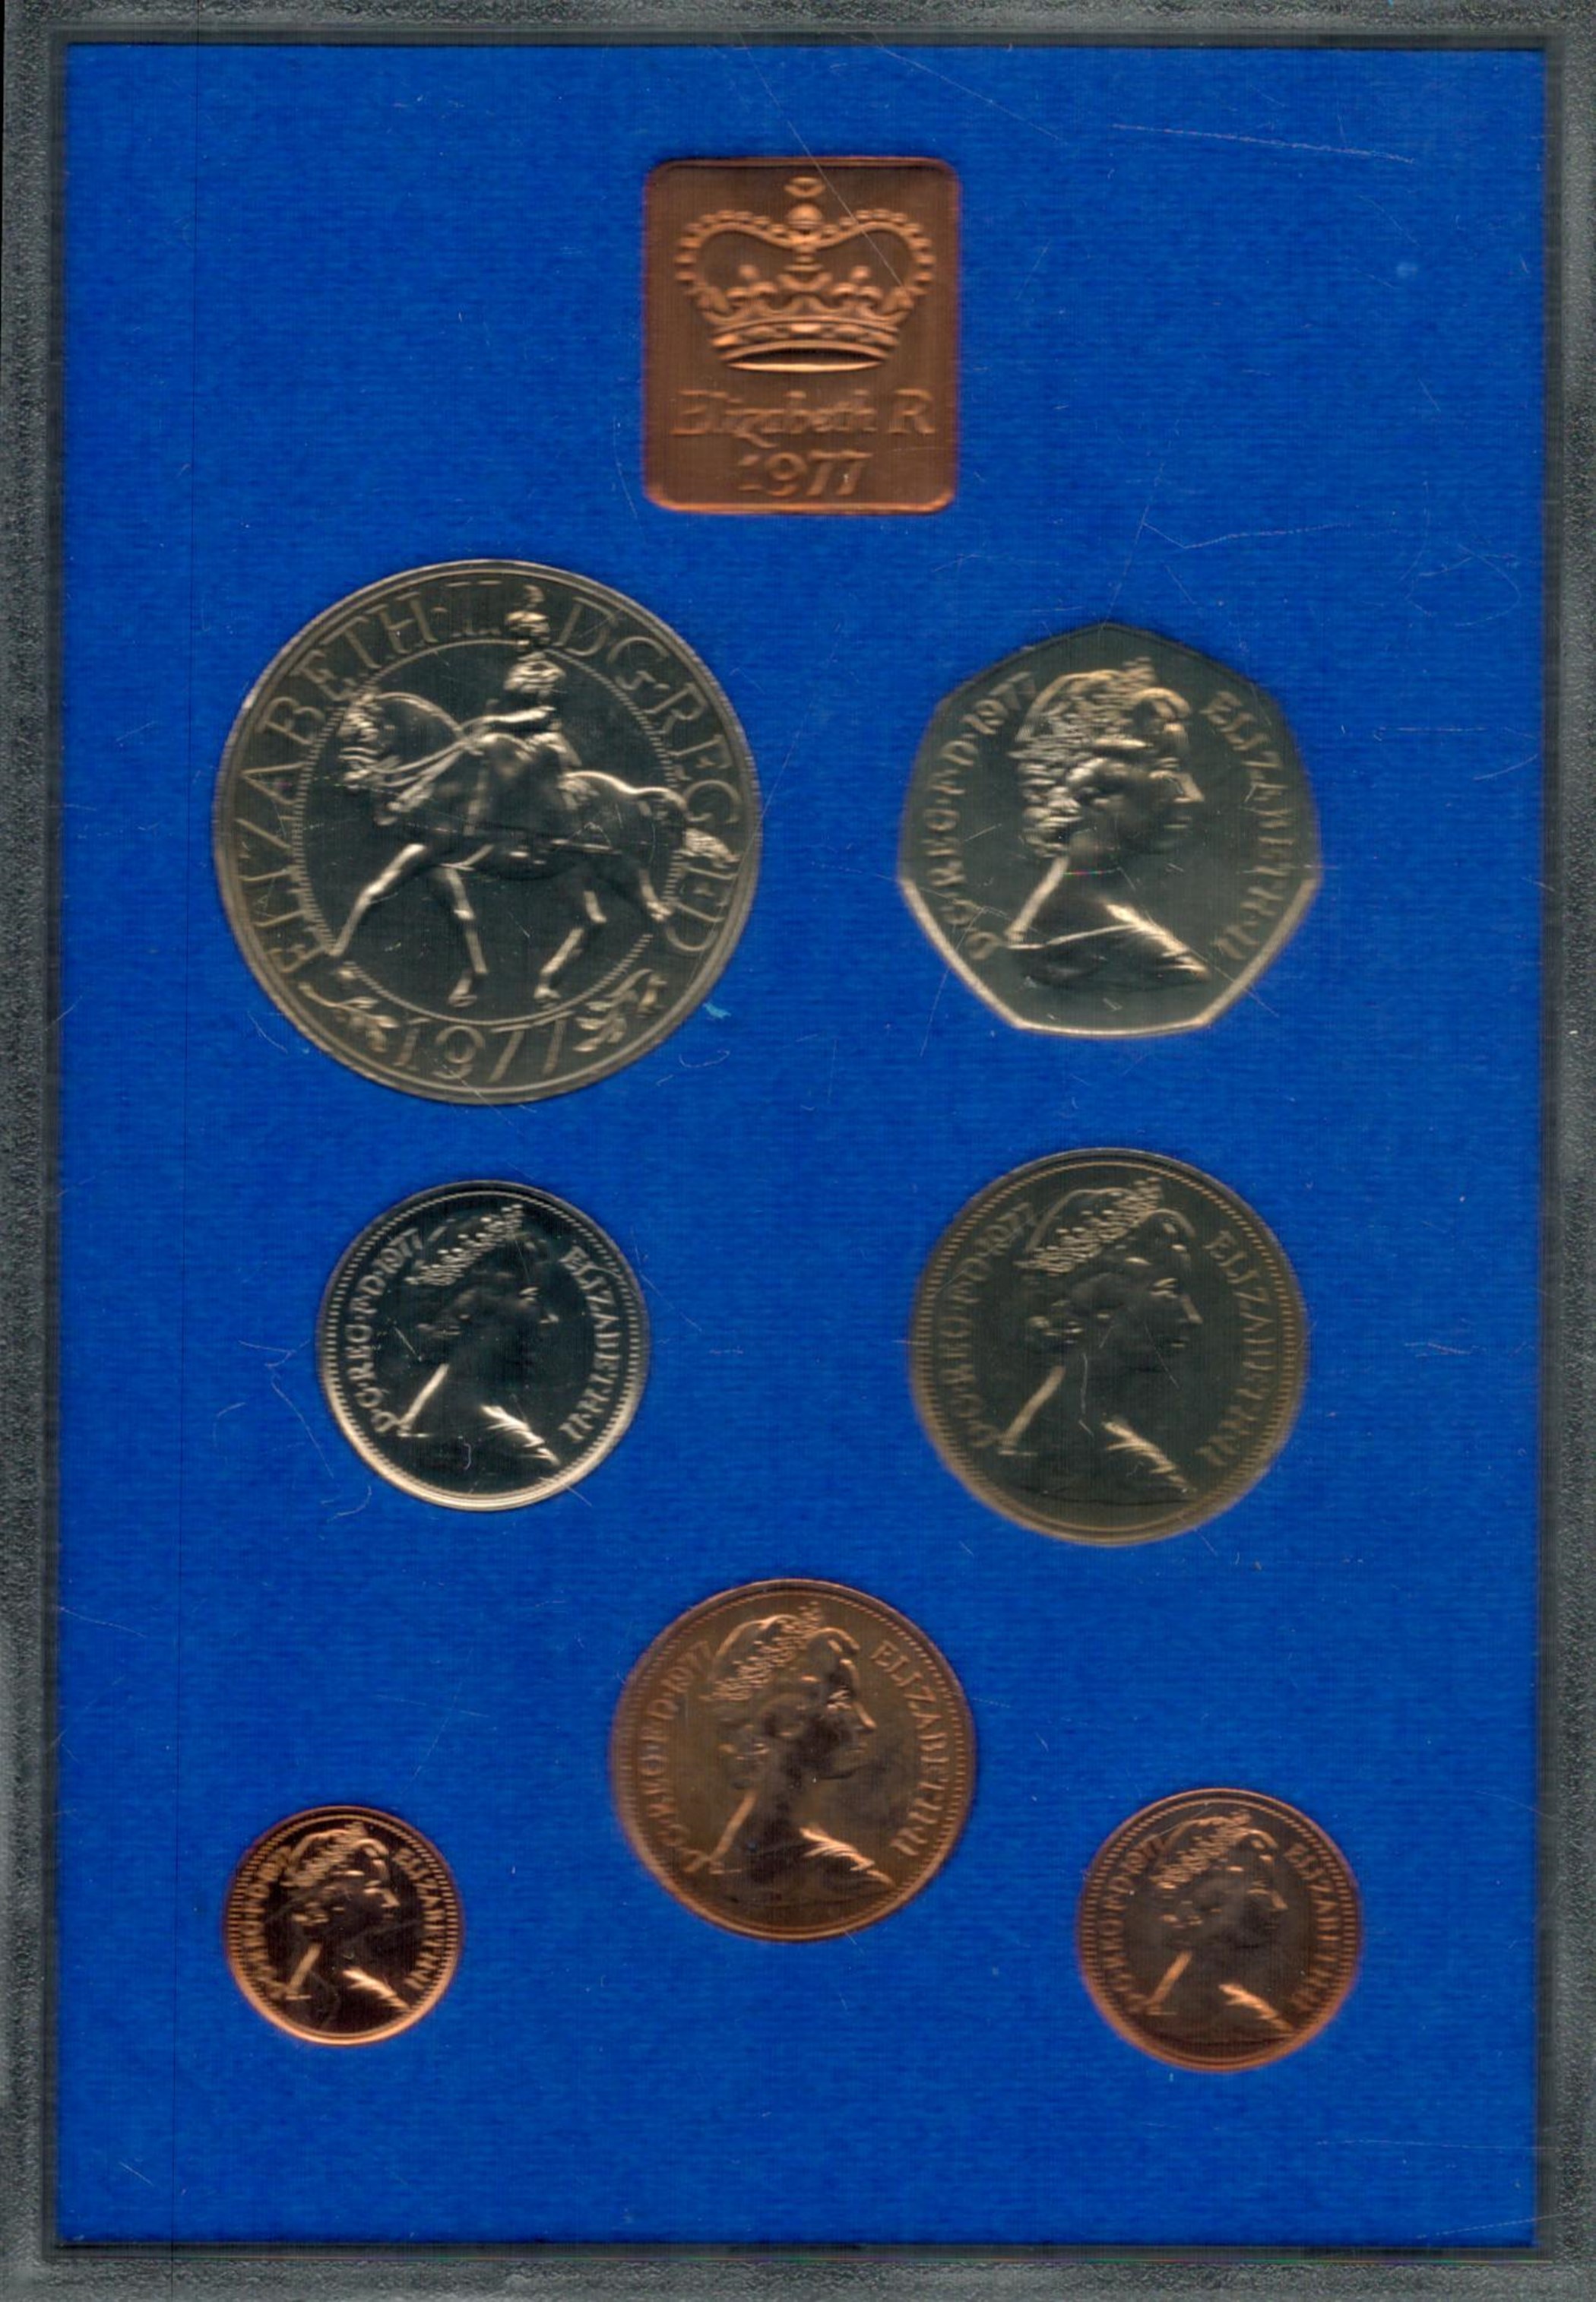 Coinage of Great Britain and Northern Ireland 1977 Proof Set in Display Case and Wallet from The - Image 3 of 3